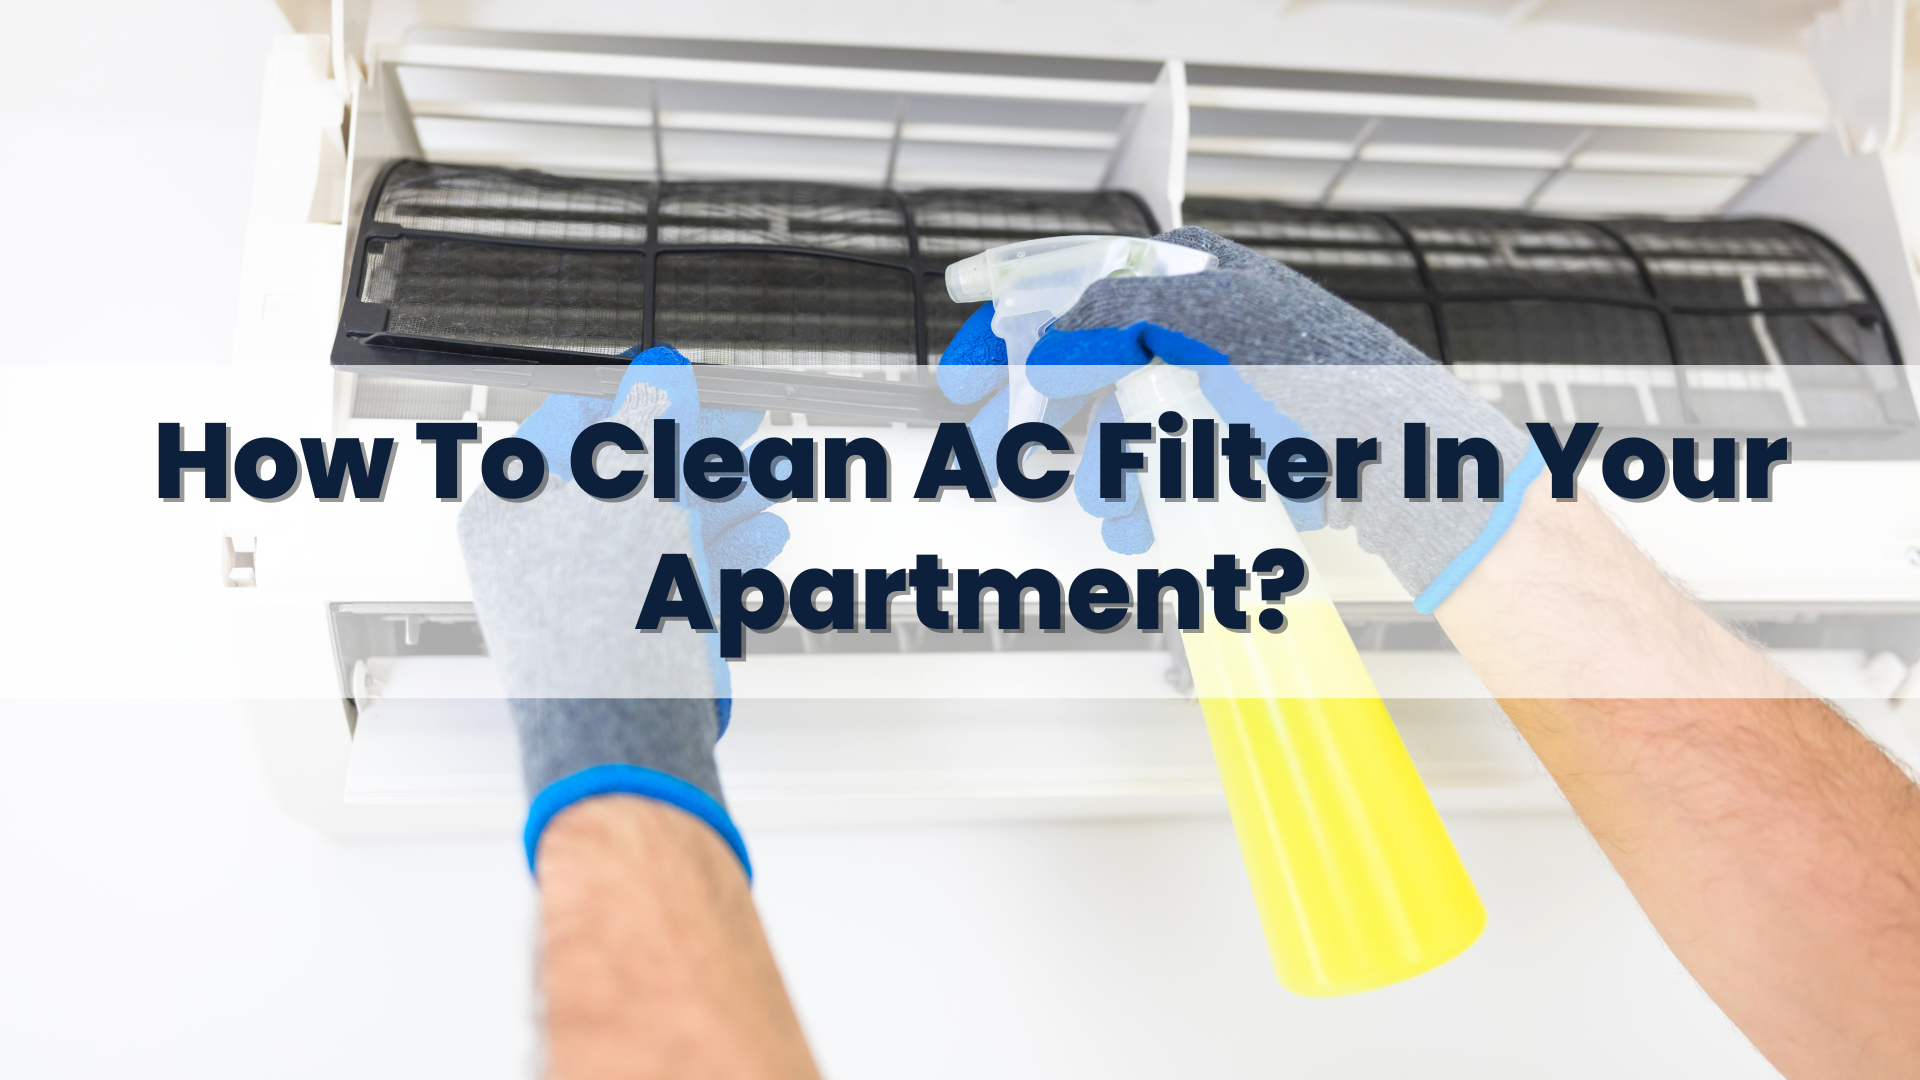 How To Clean AC Filter In Your Apartment